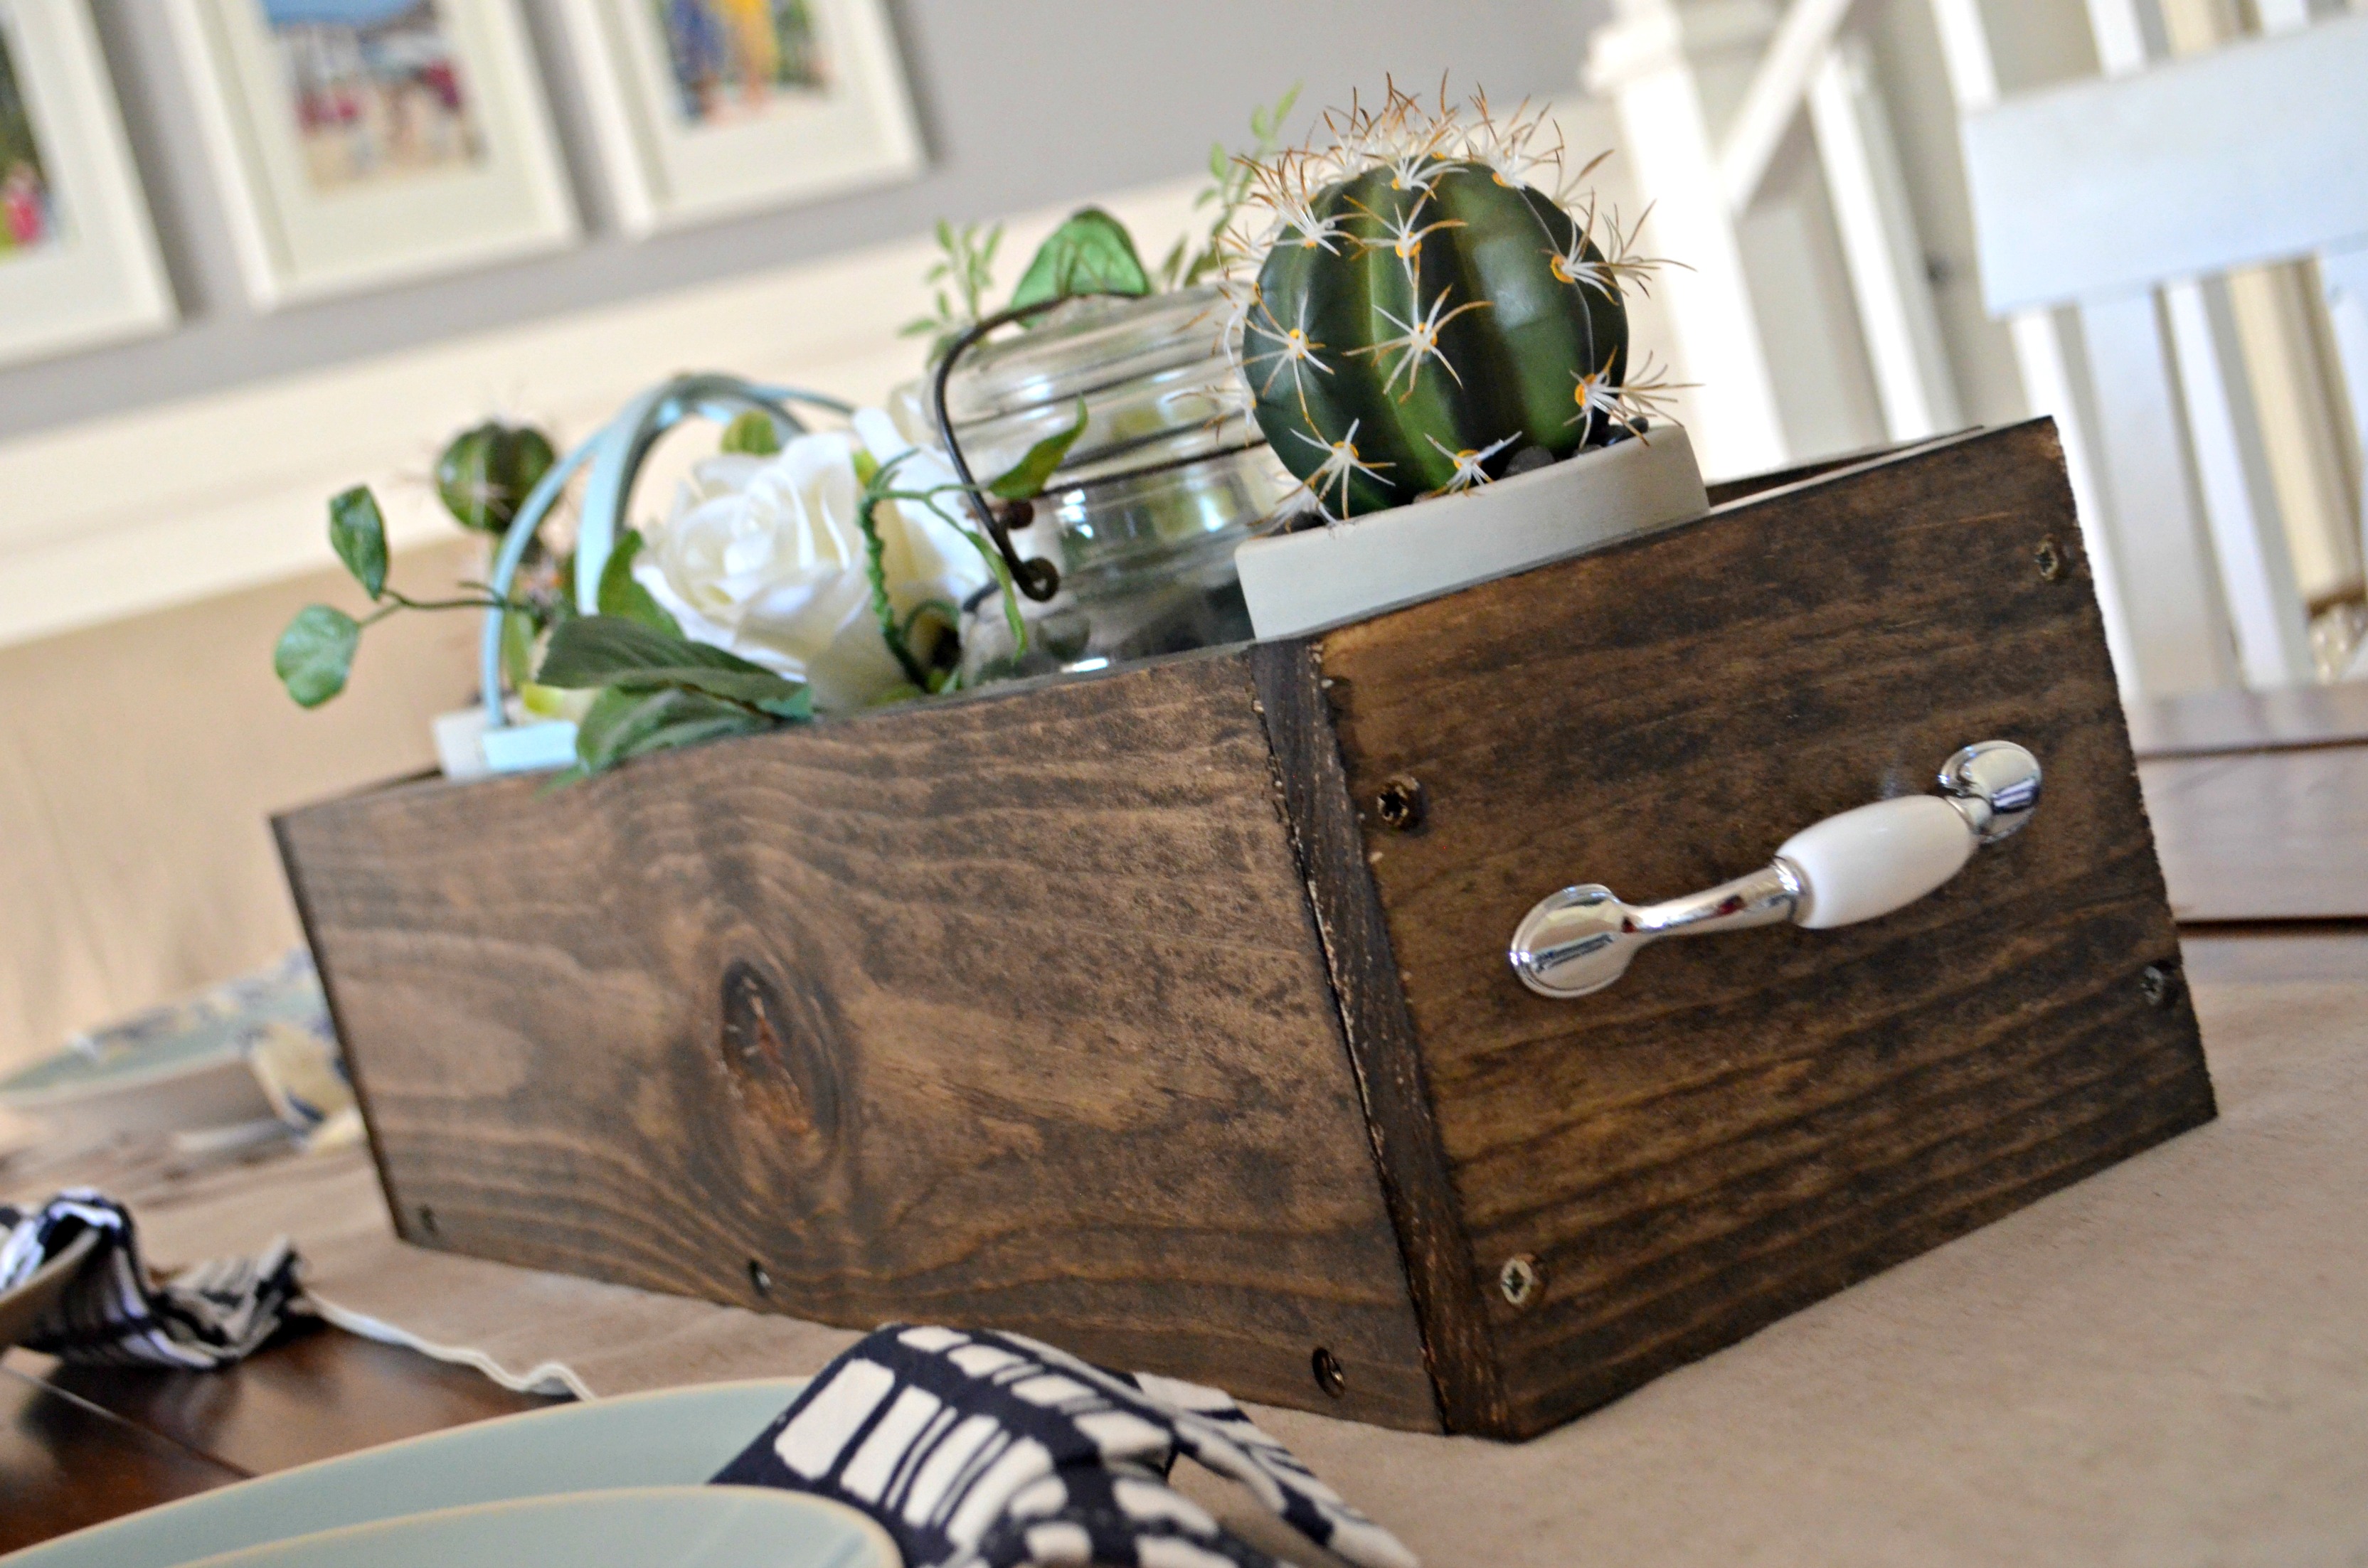 DIY: Build this Rustic Farmhouse Wood Box Centerpiece for Under 